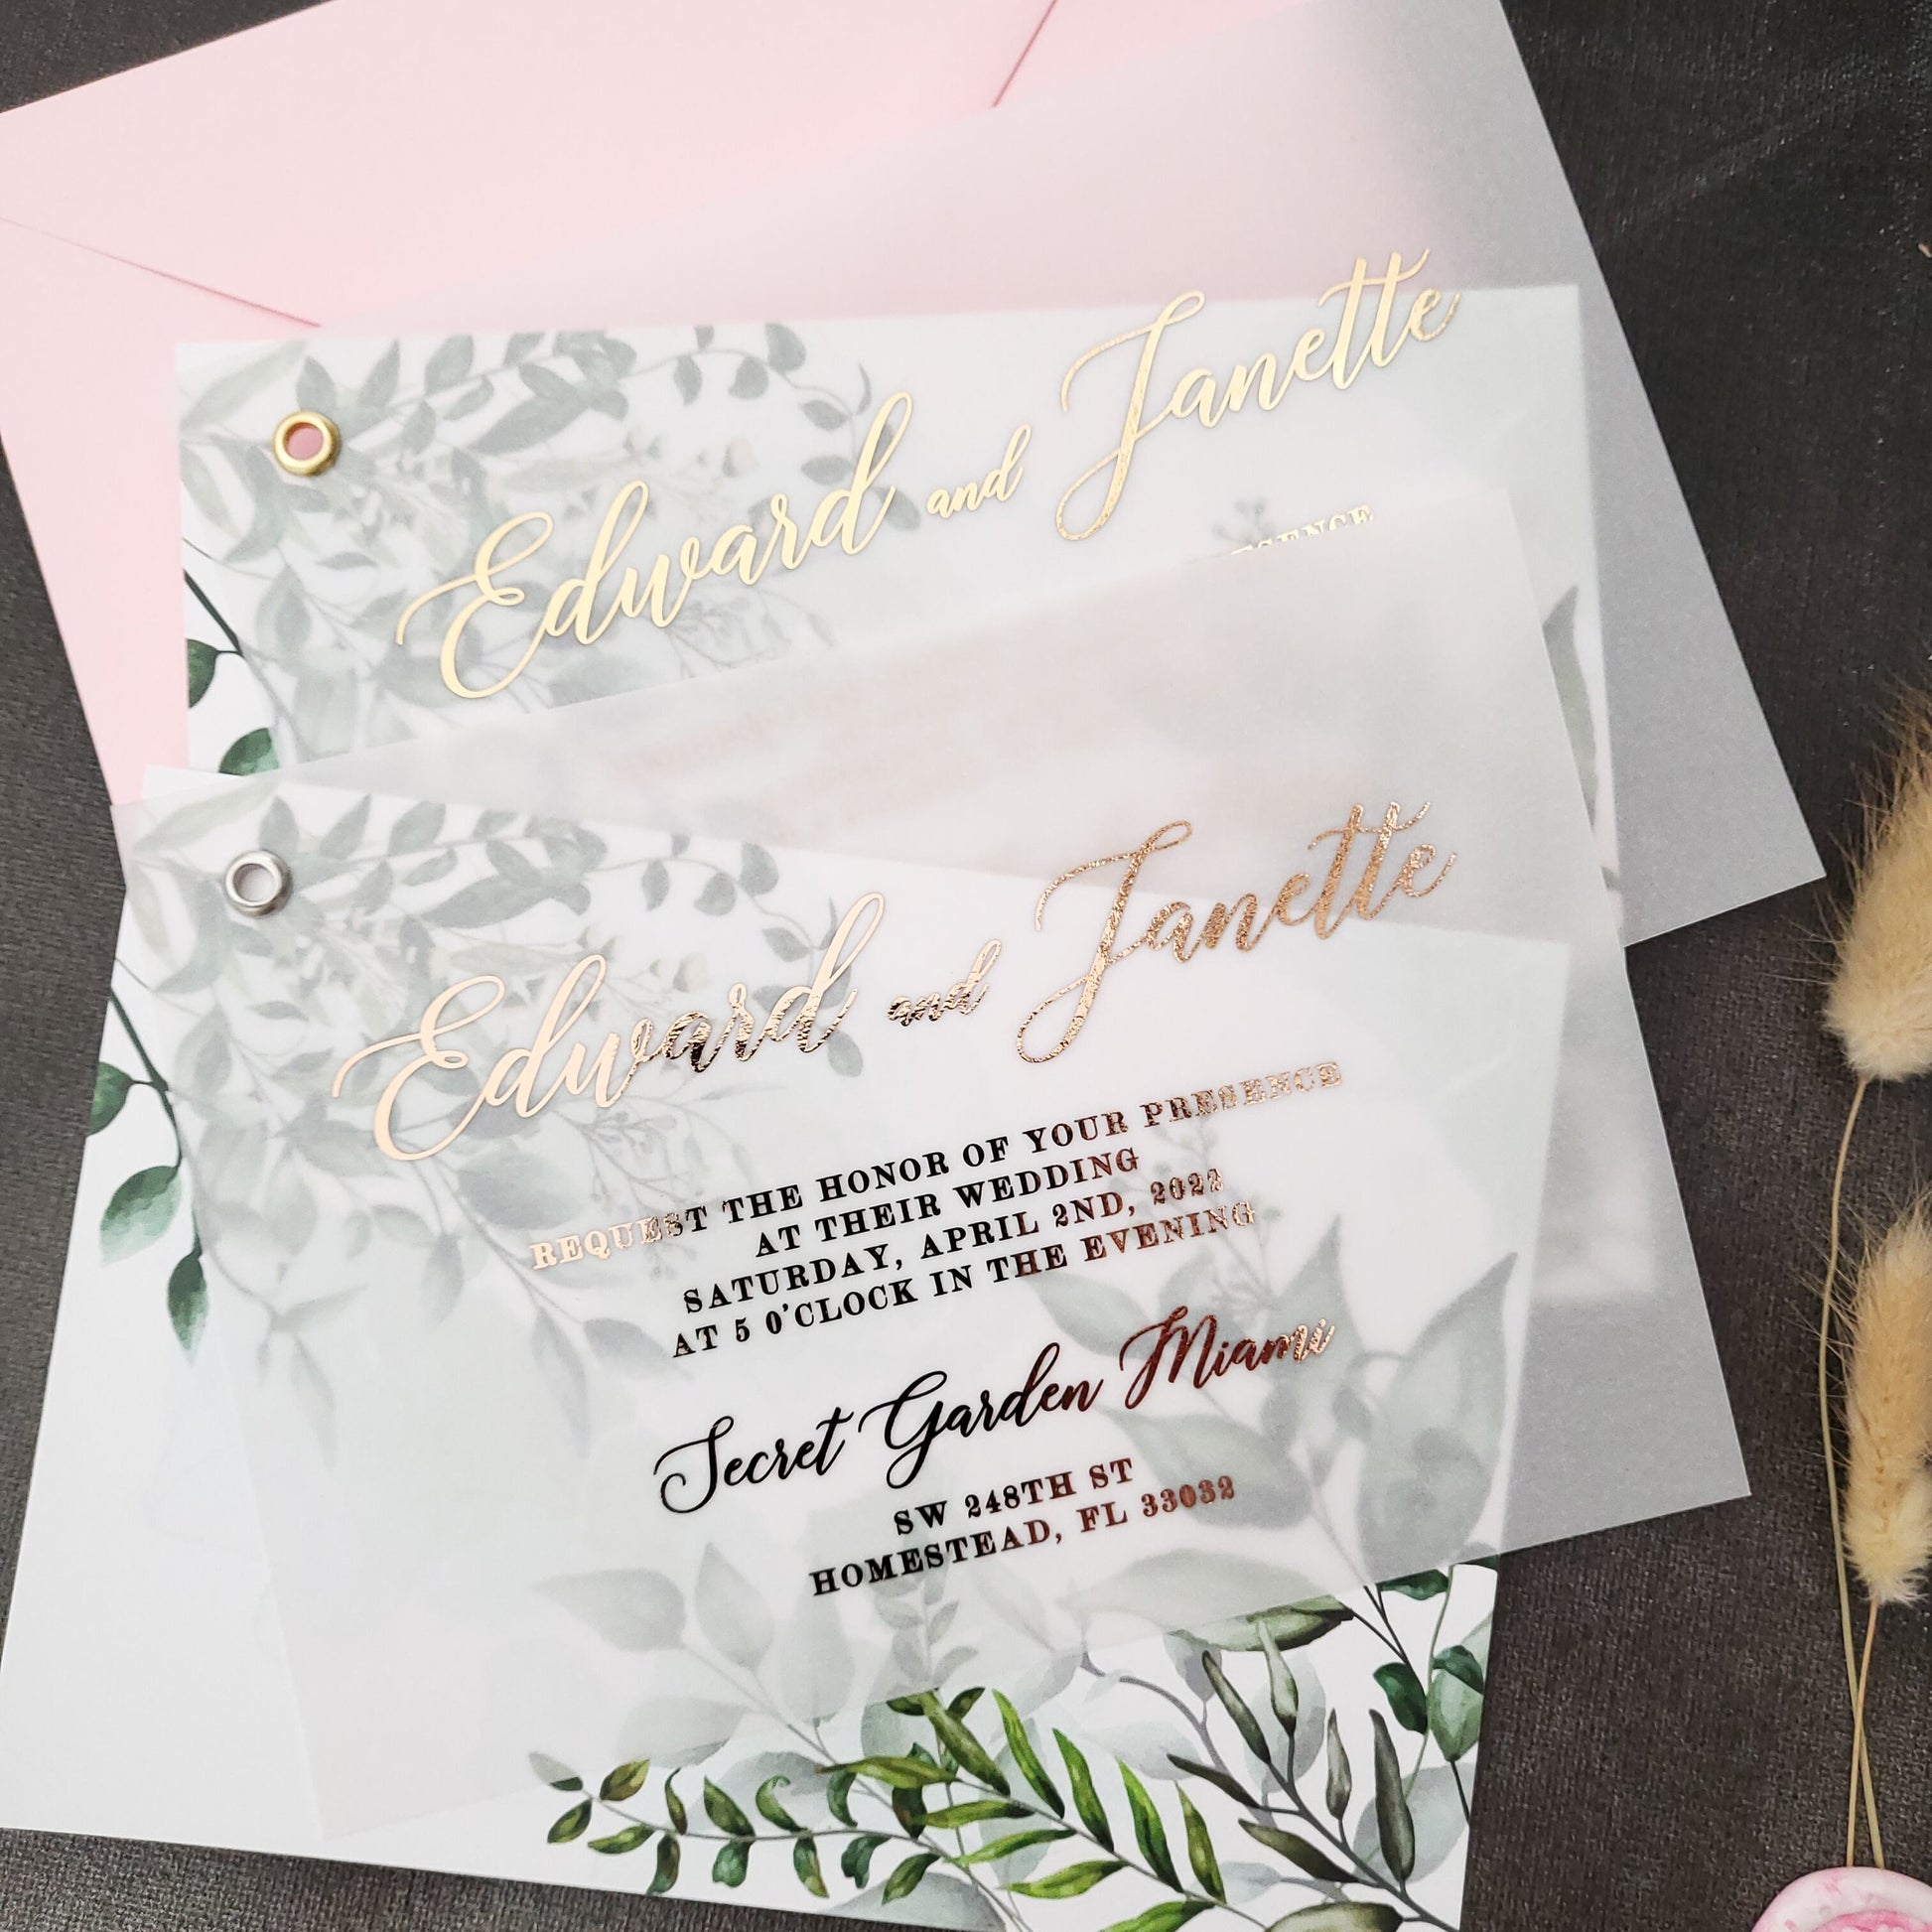 Vellum Wedding Invitation with Gold Foil Print - Elegant and Luxurious Design with Greenery Accents